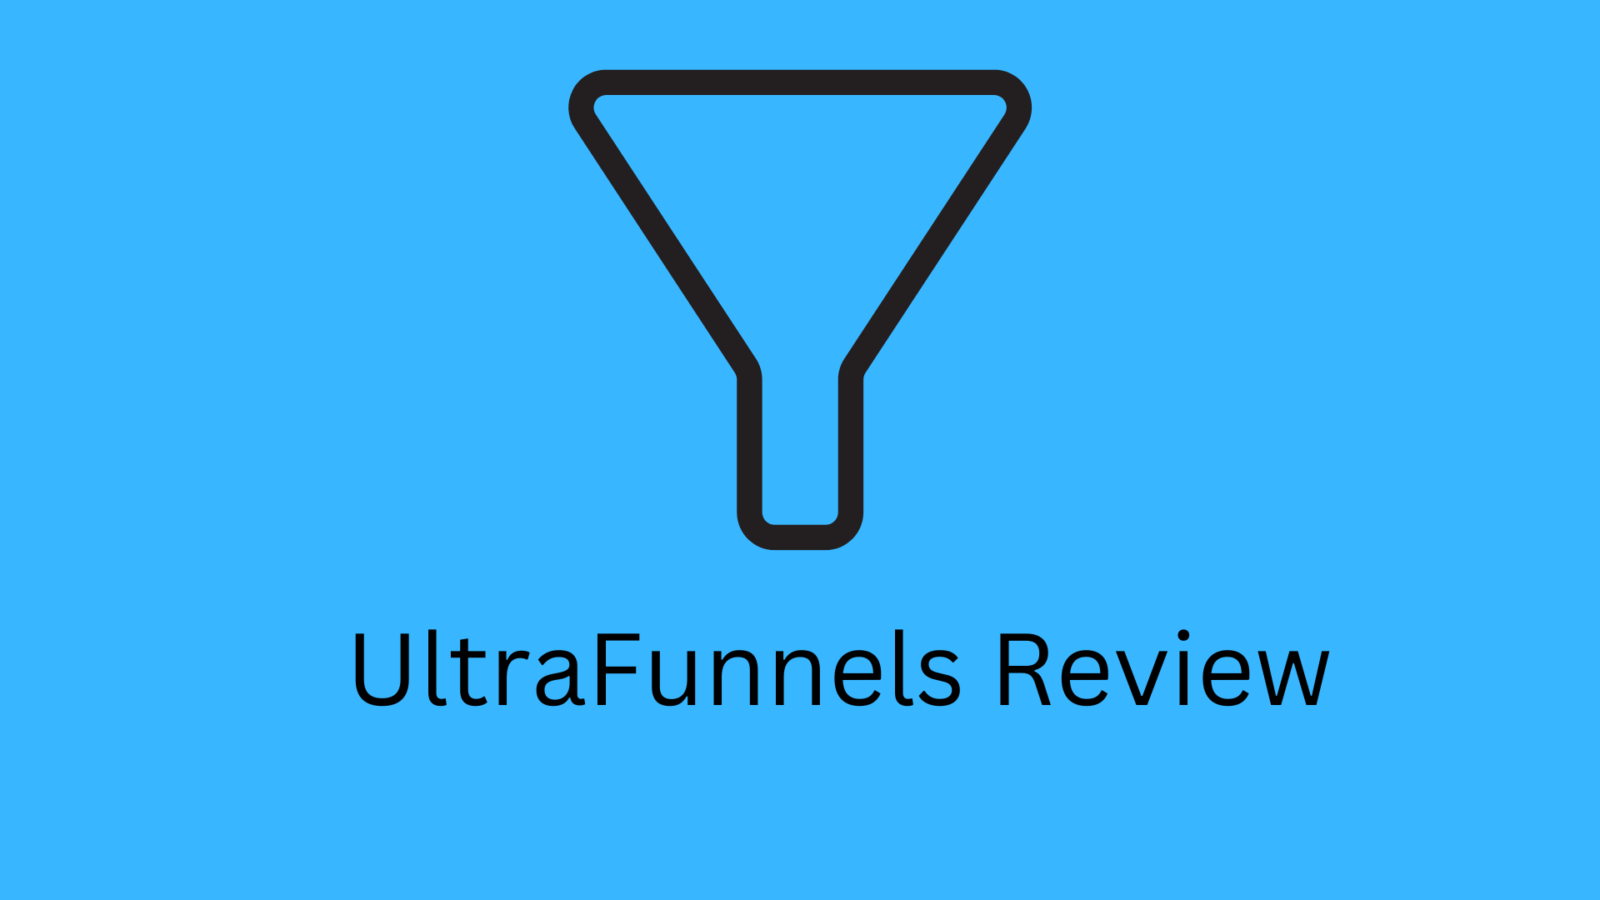 UltraFunnels Review